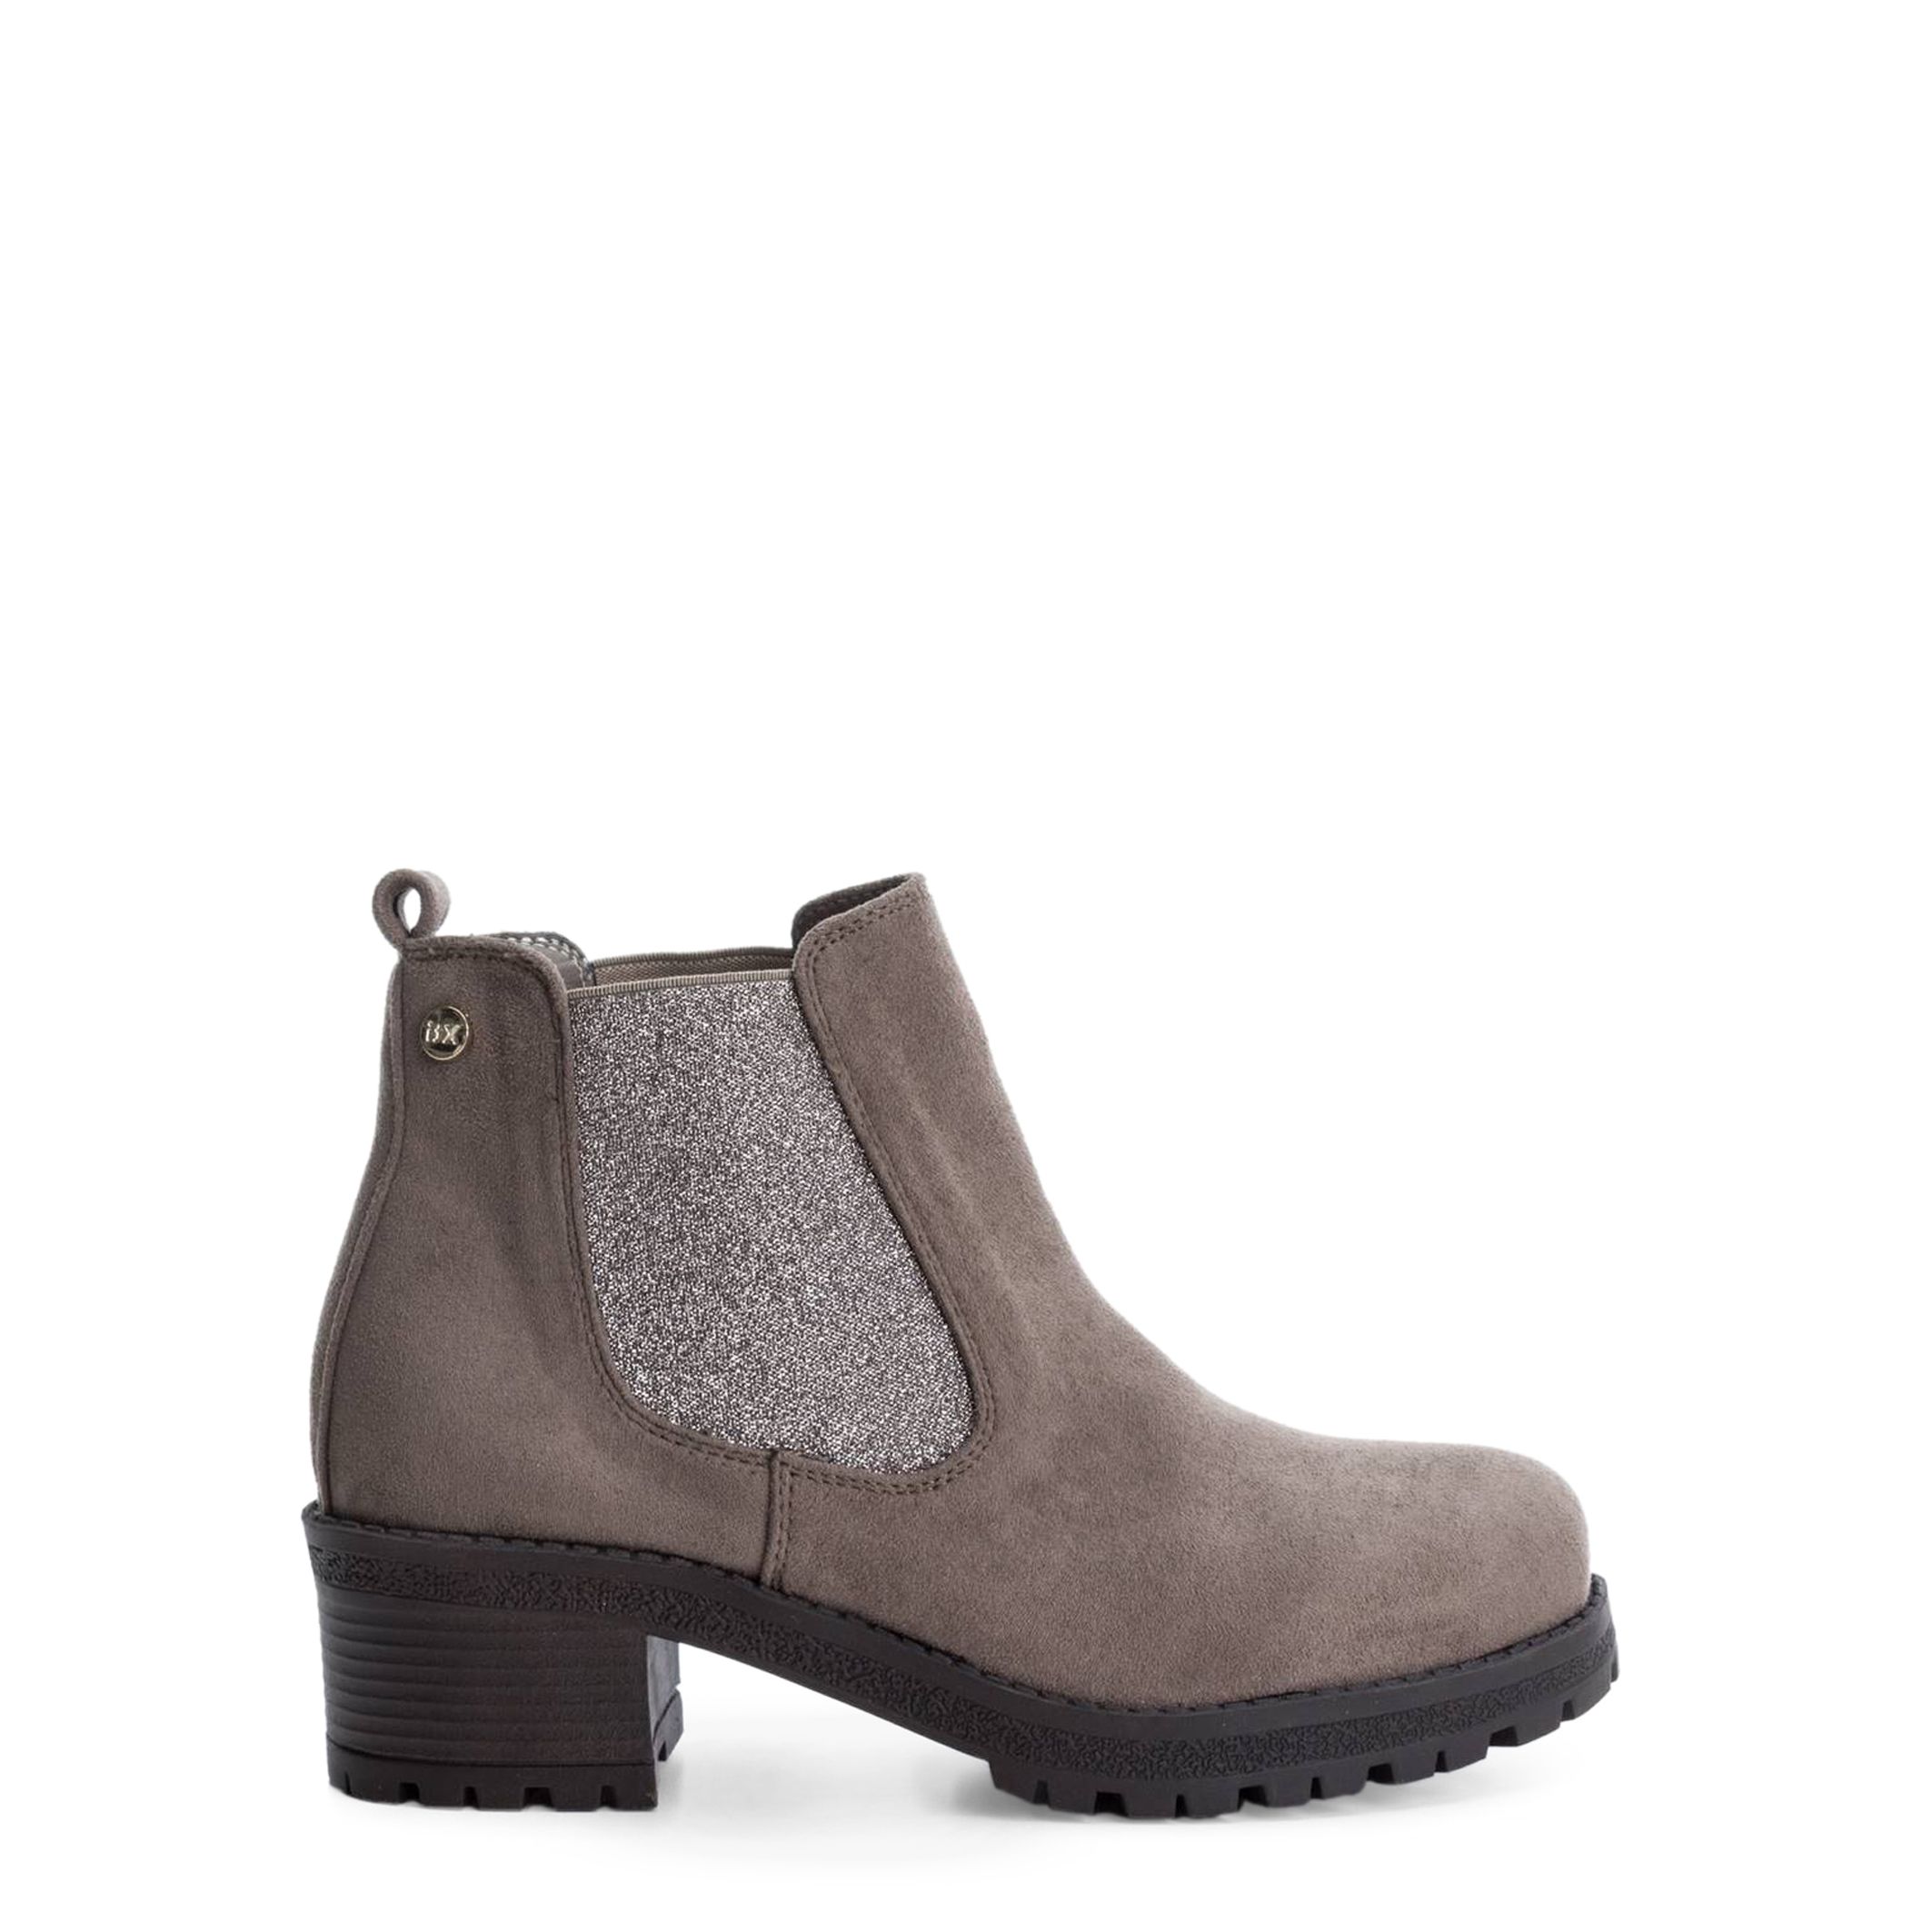 Collection: Fall/Winter <br> Gender: Woman <br> Type: Ankle boots <br> Upper: synthetic material <br> Internal lining: synthetic material, fabric <br> Sole: rubber <br> Heel height cm: 5 <br> Platform height cm: 2\ <br> Details: elastic gores, round toe